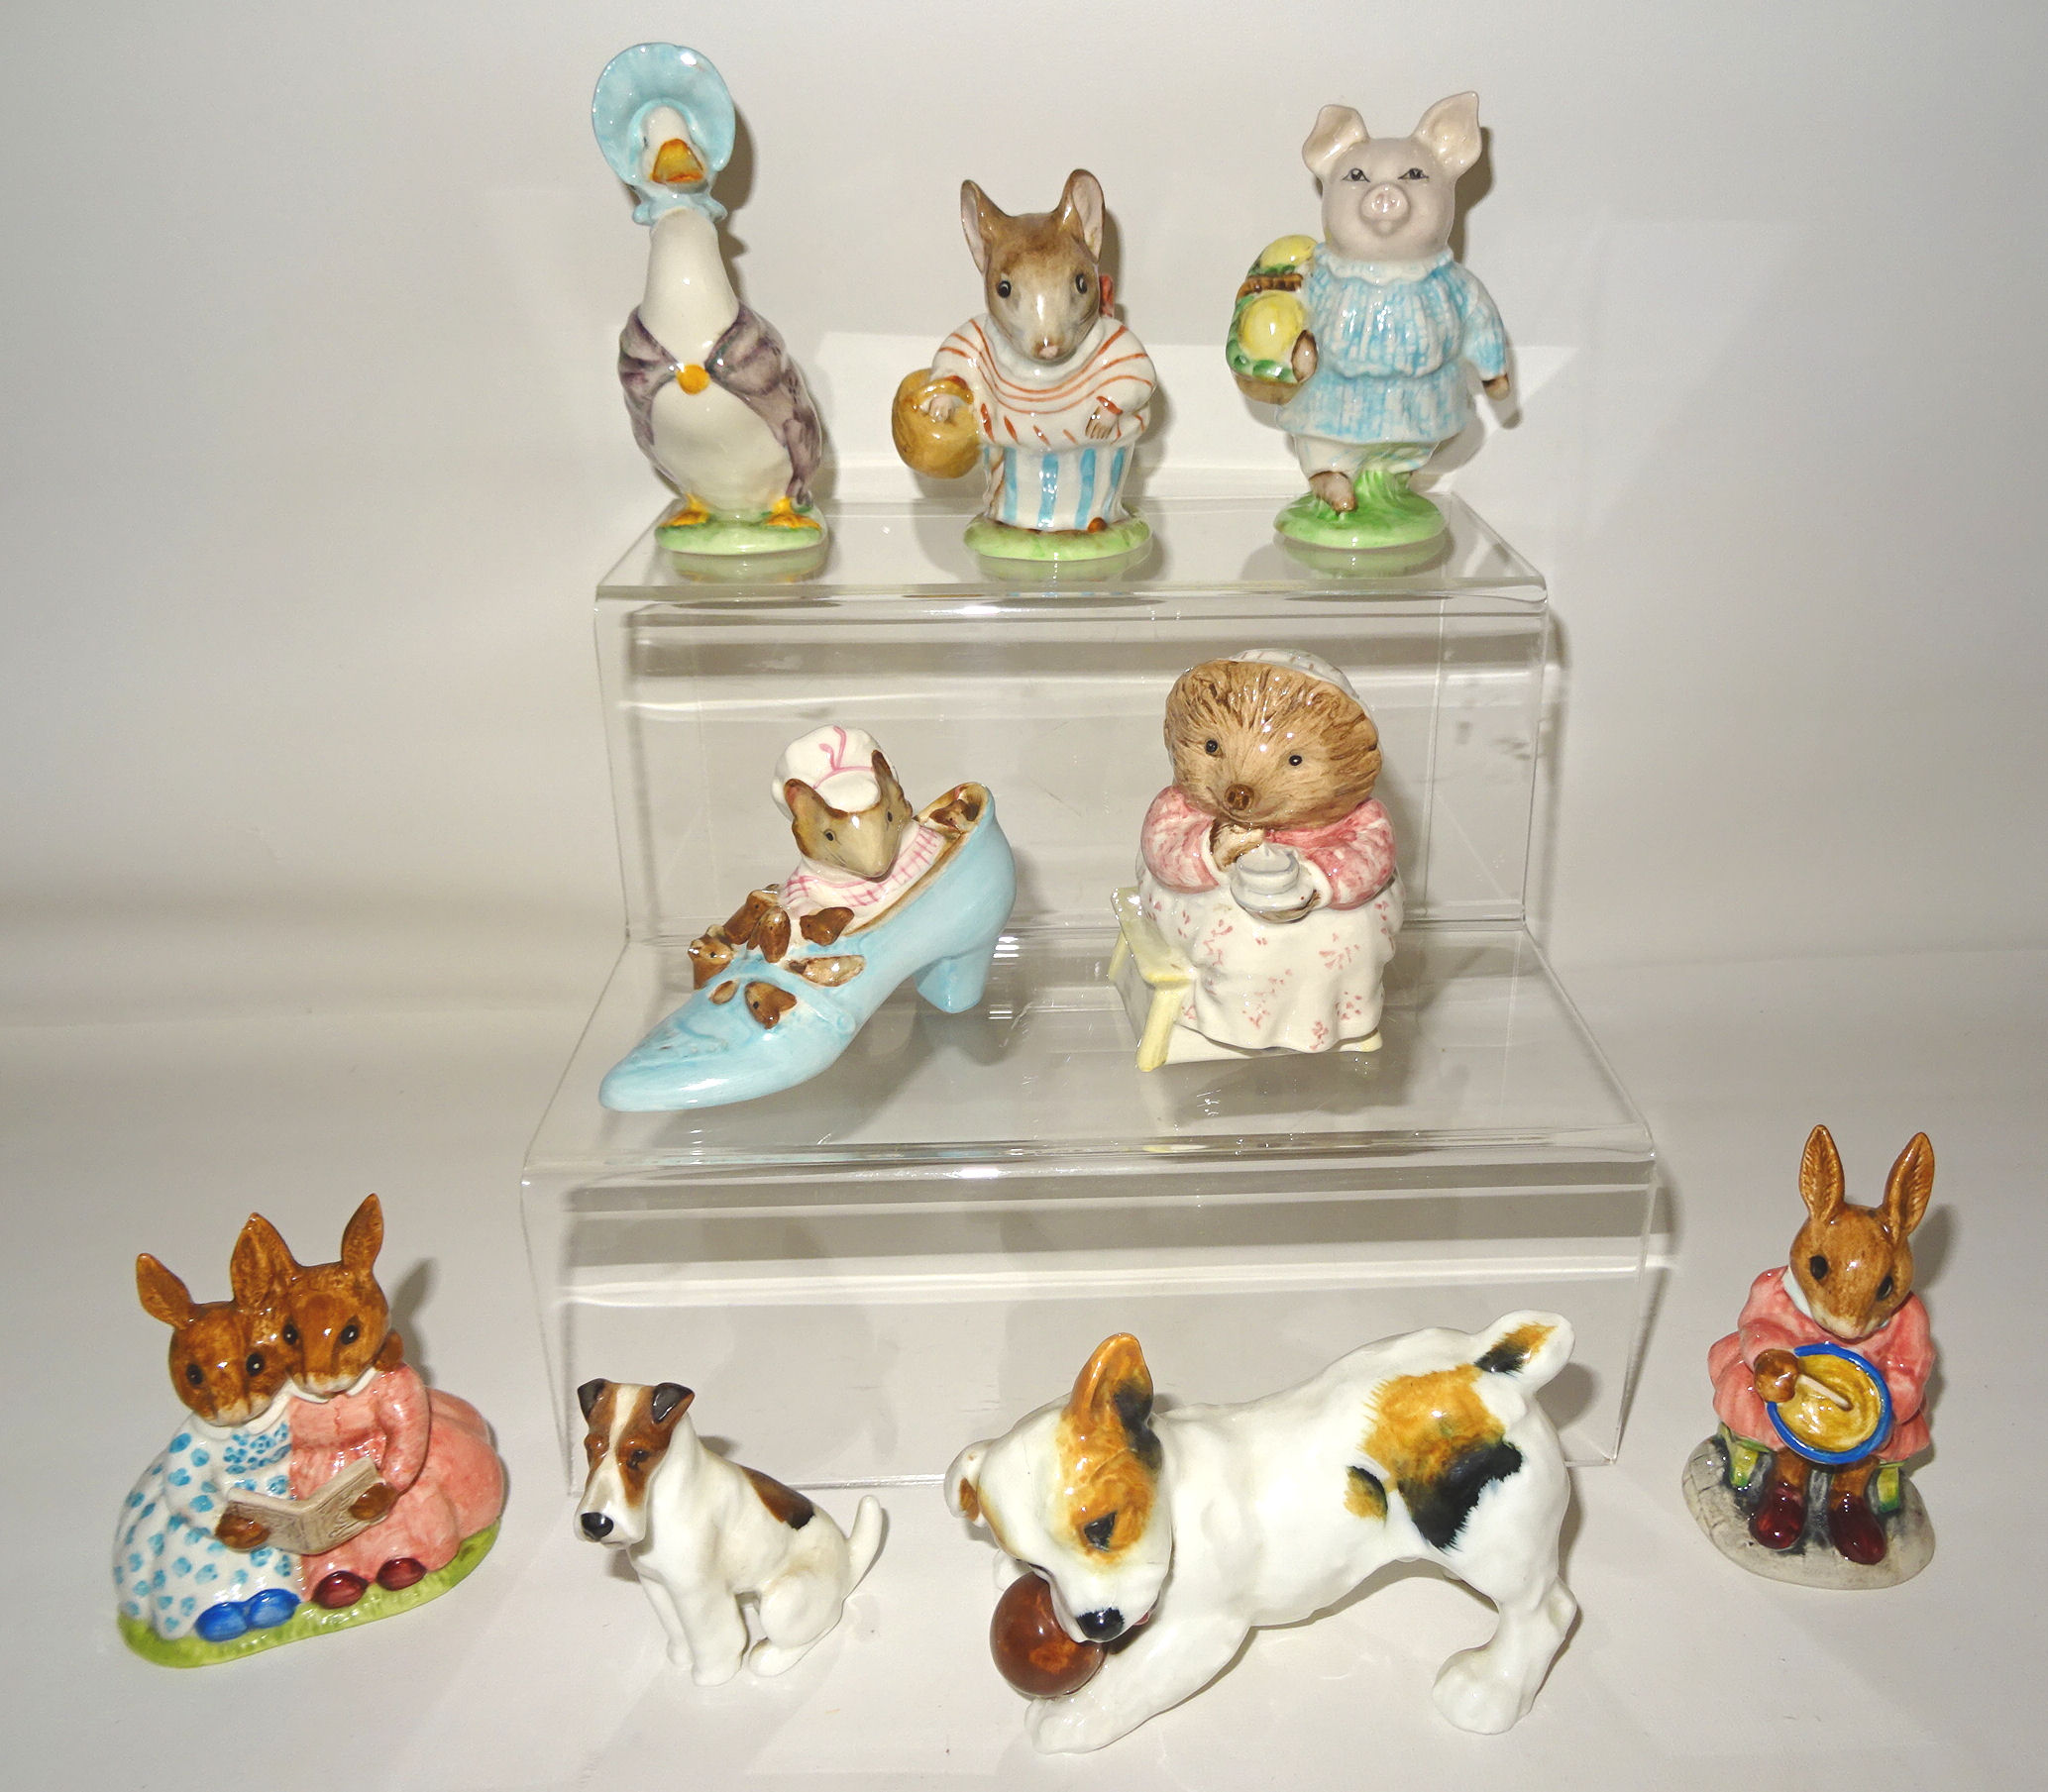 Four Beswick Beatrix Potter figures including Jemima Puddleduck, Mrs Tittlemouse and two others, all